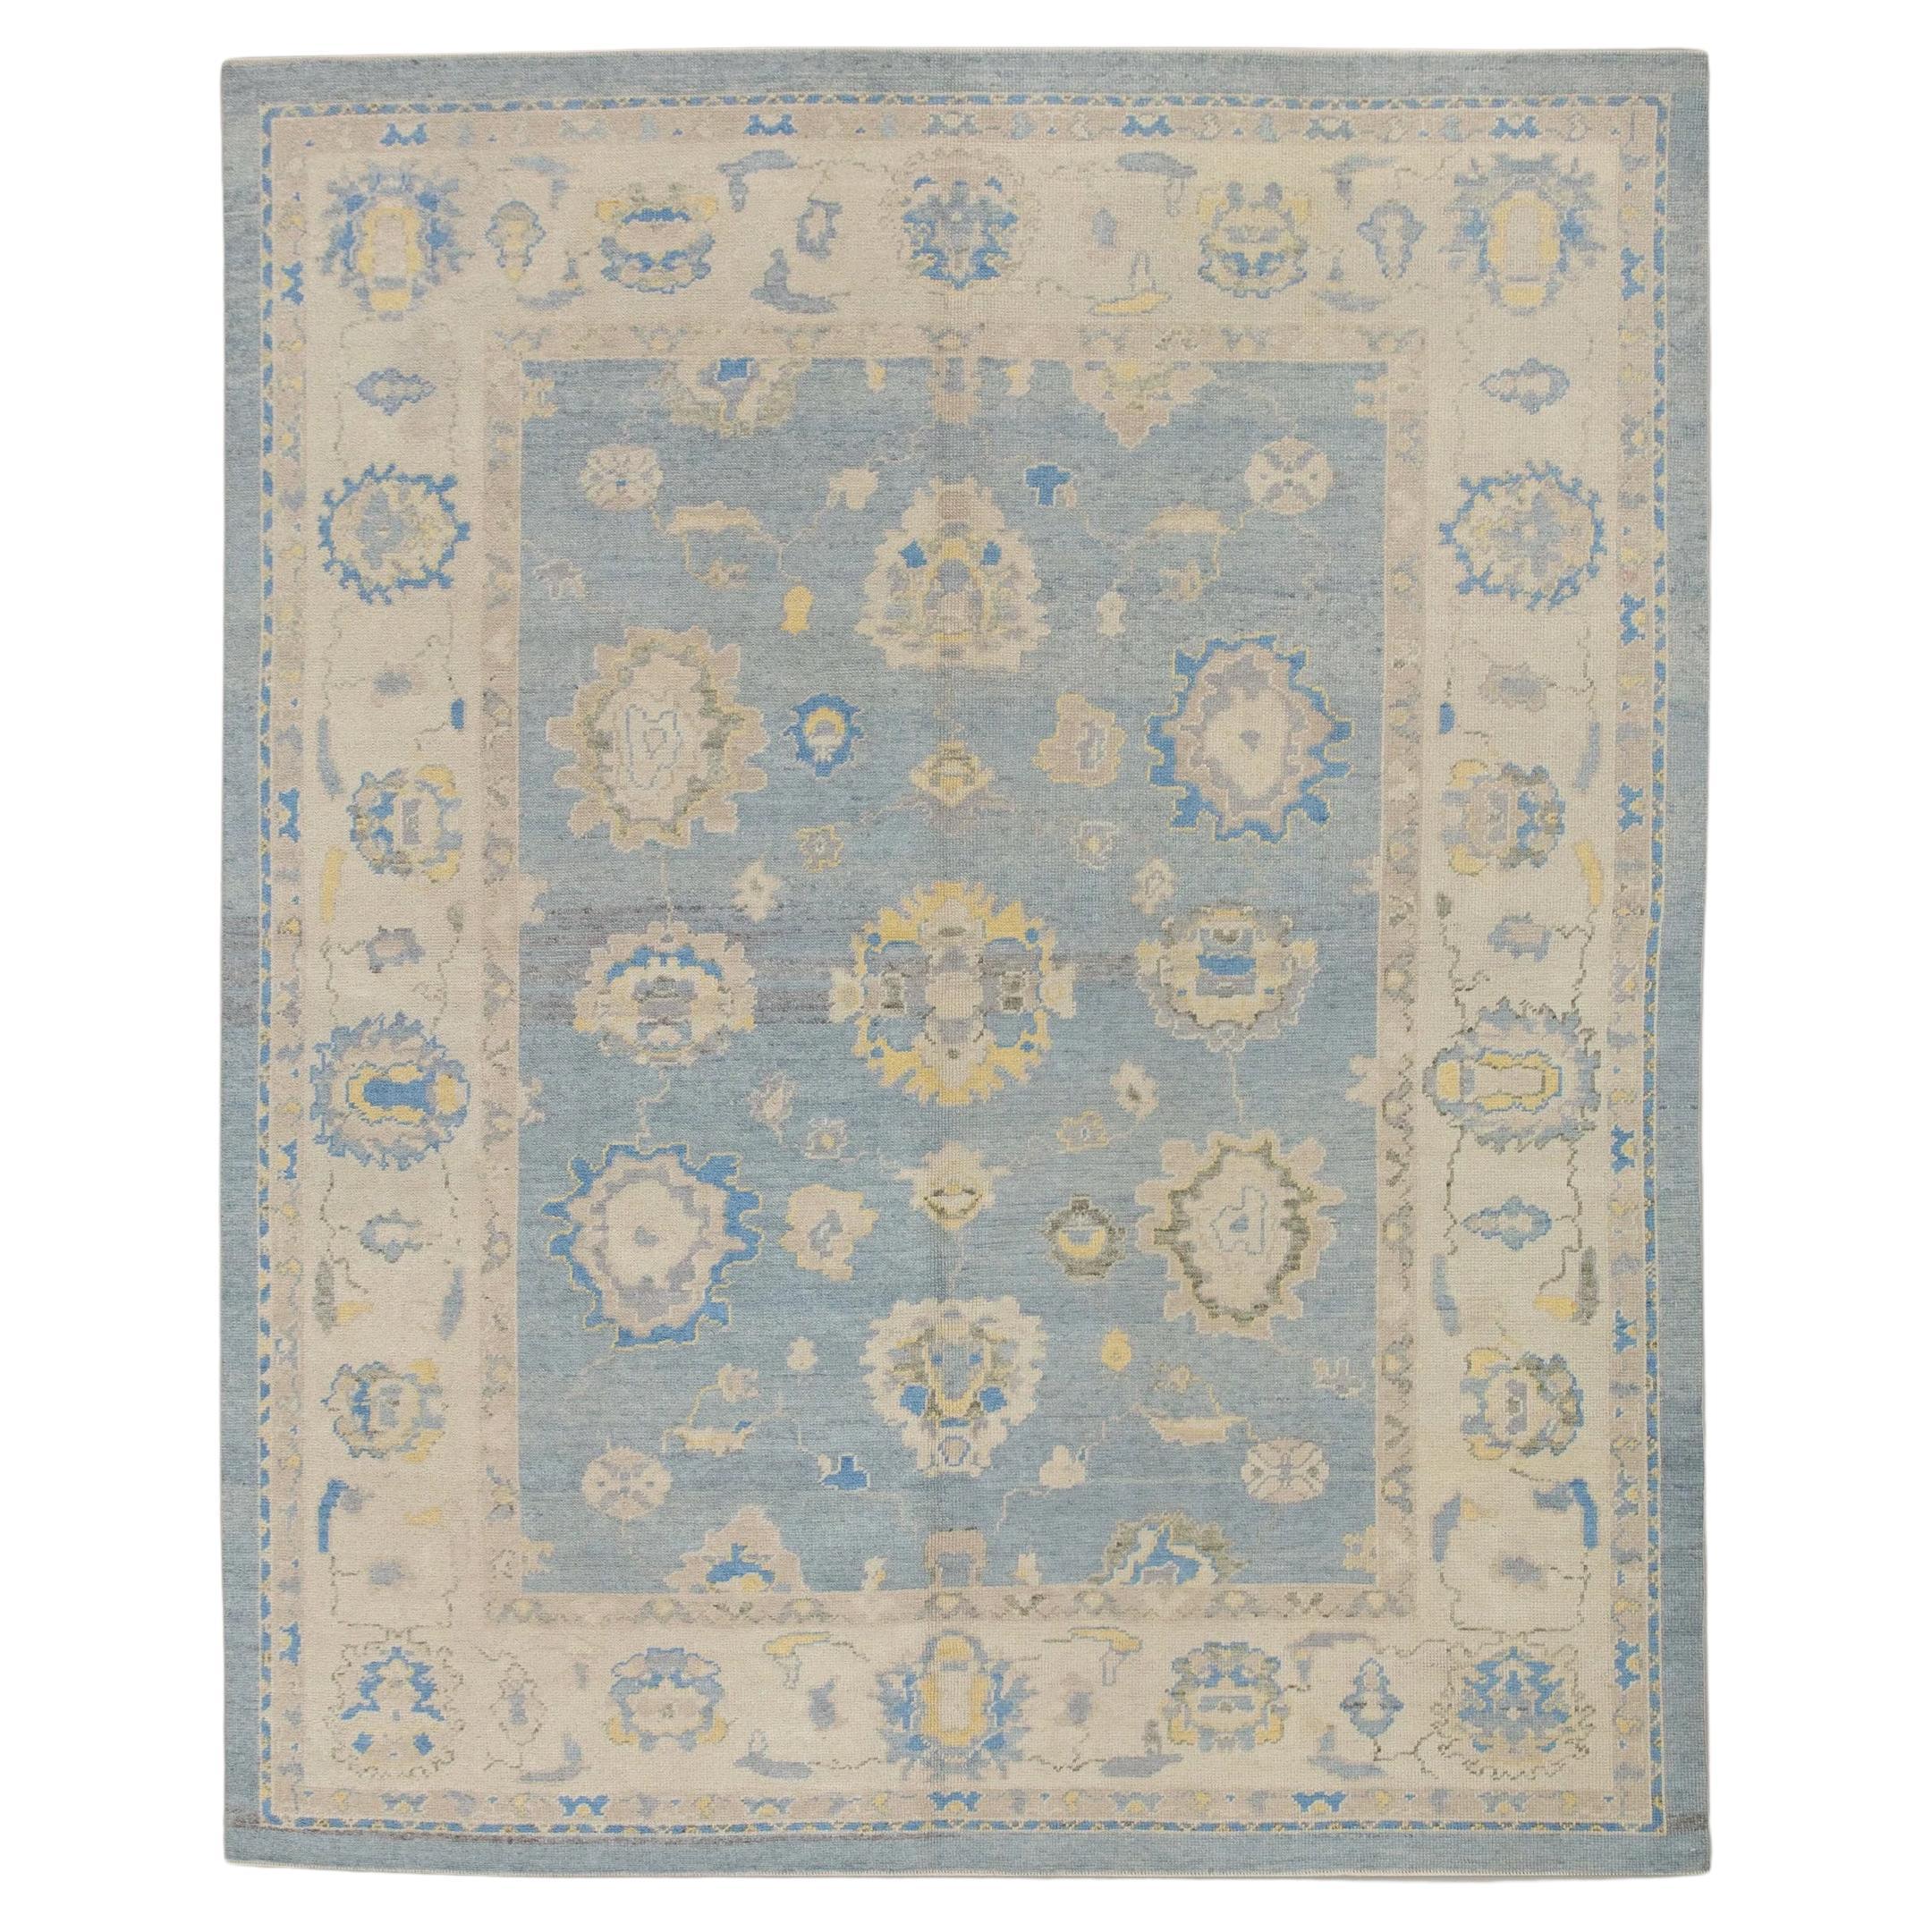 Blue & Yellow Floral Handwoven Wool Turkish Oushak Rug 8' x 9'10" For Sale